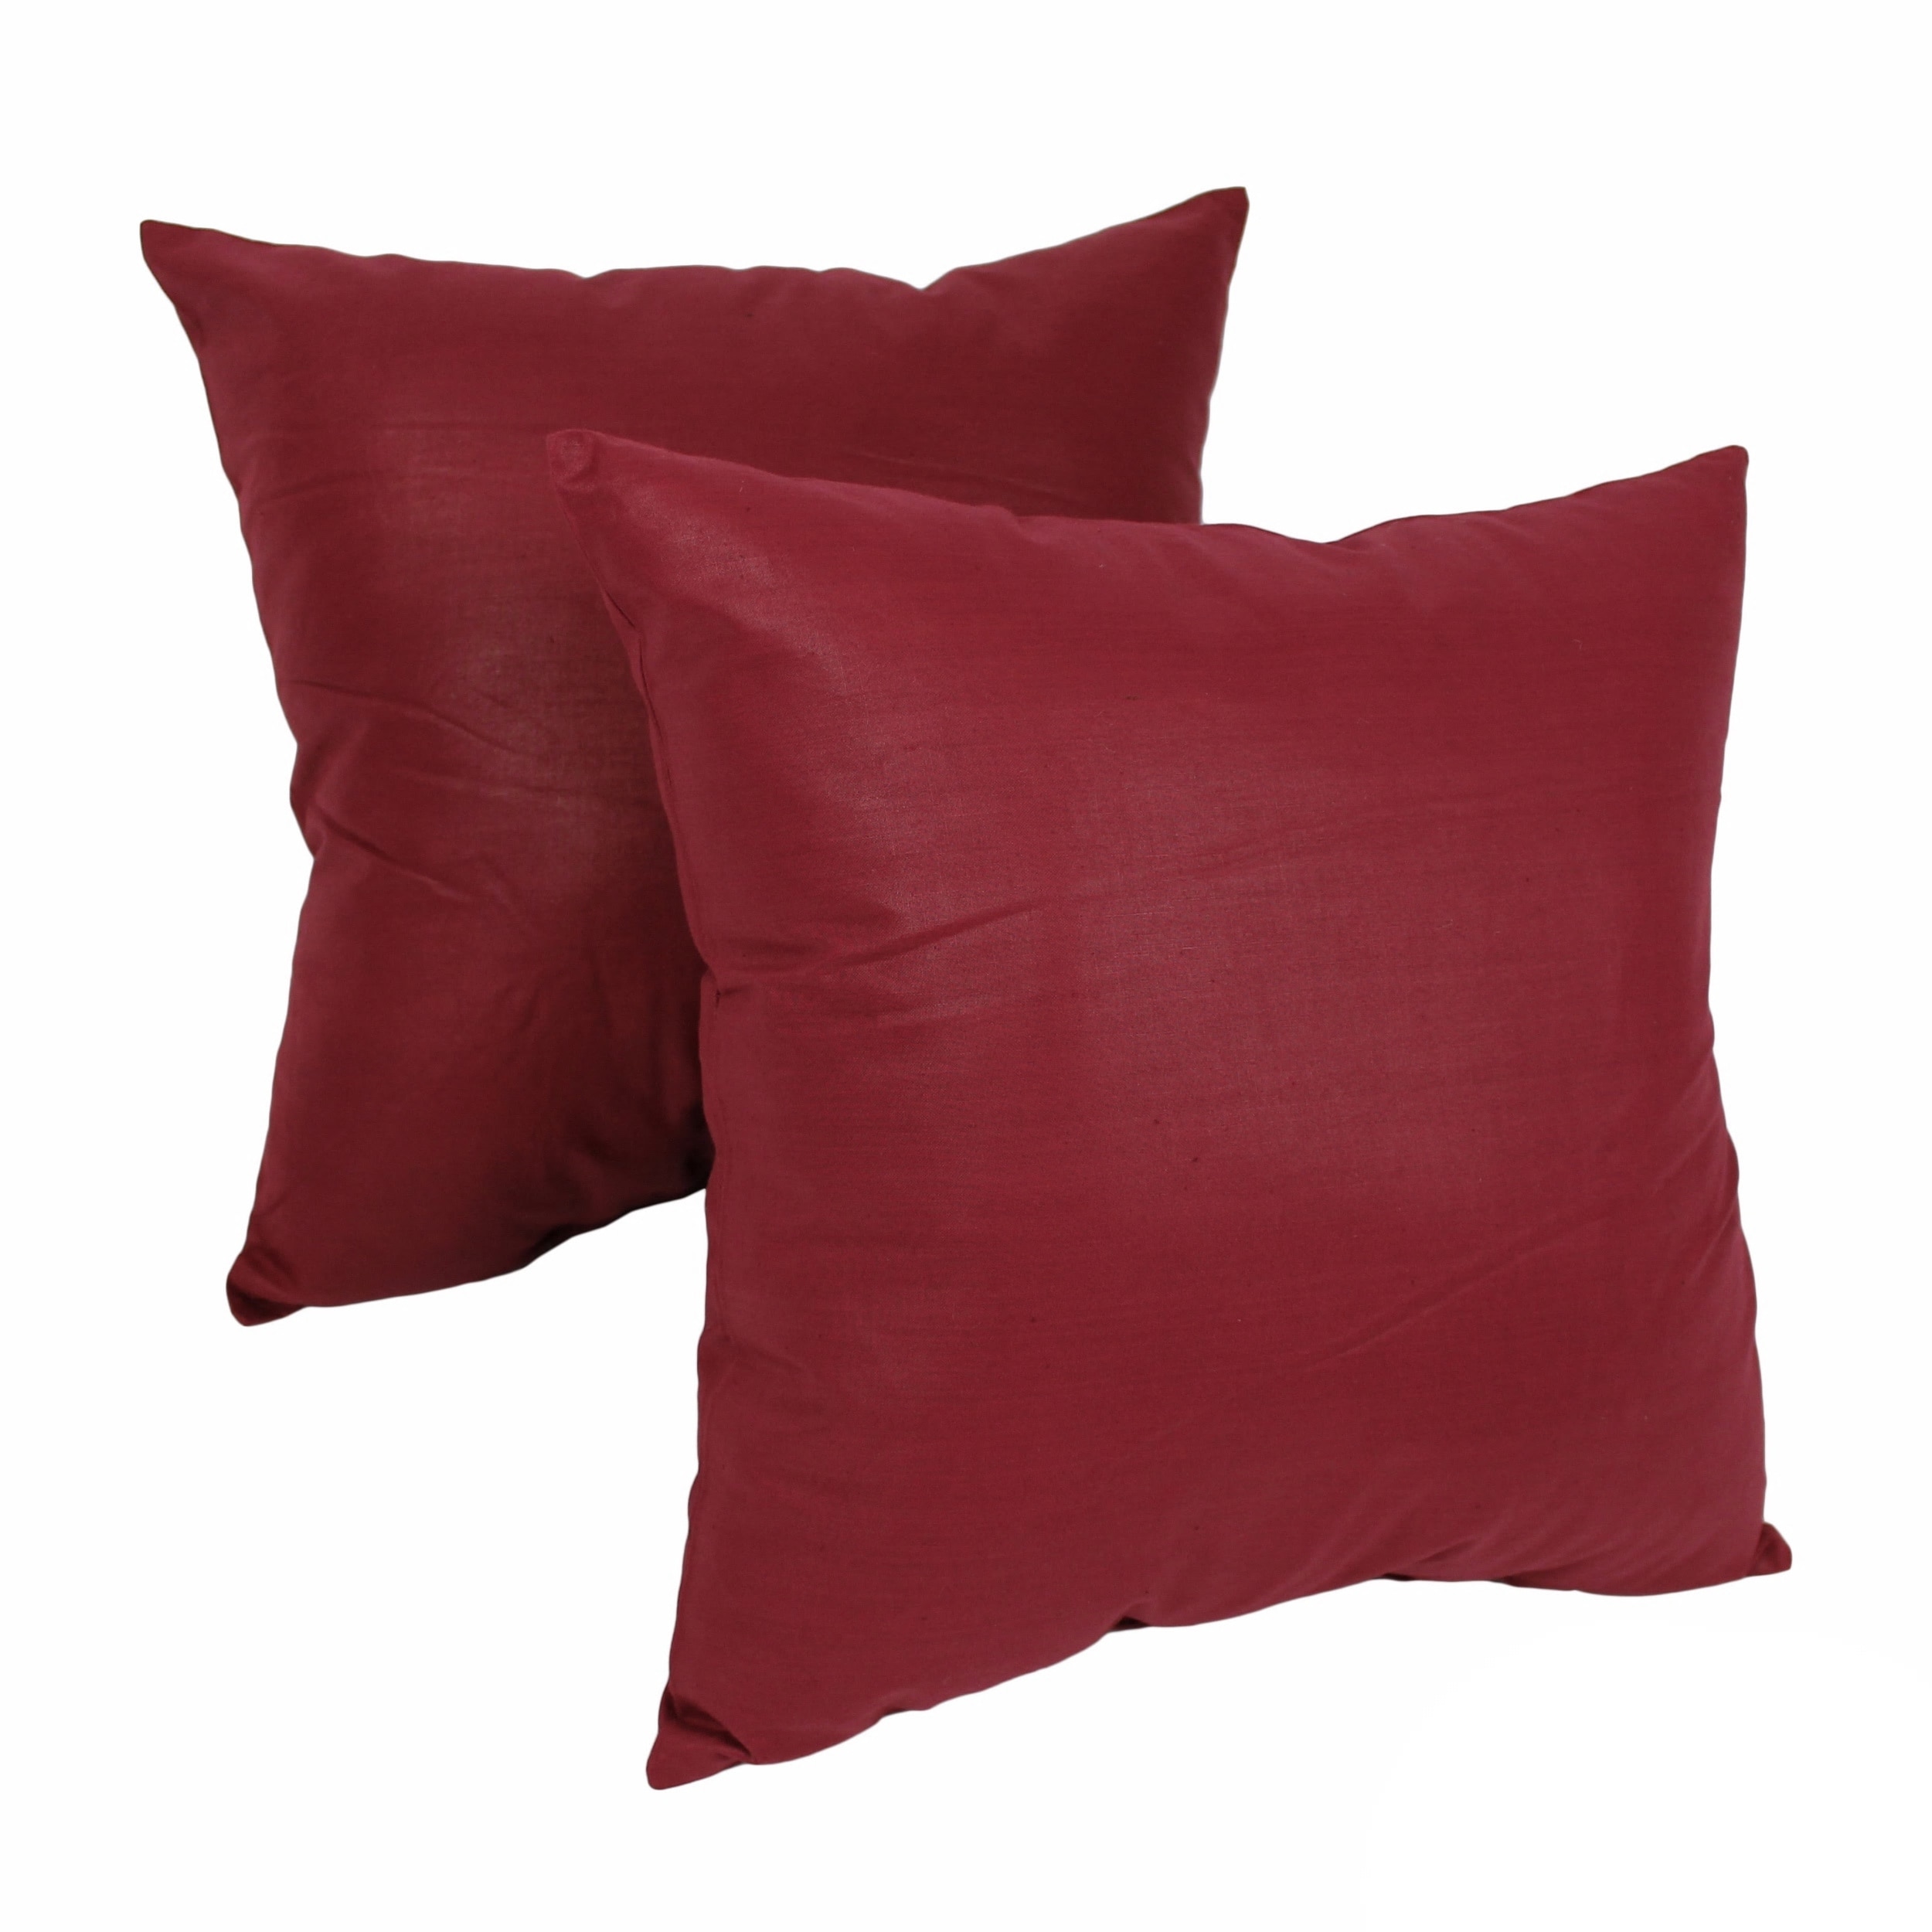 https://ak1.ostkcdn.com/images/products/is/images/direct/ba6badc086d86dee9151c92a1ae3f25bfa674910/Chintz-16-inch-Square-Indoor-Throw-Pillows-%28Set-of-2%29.jpg